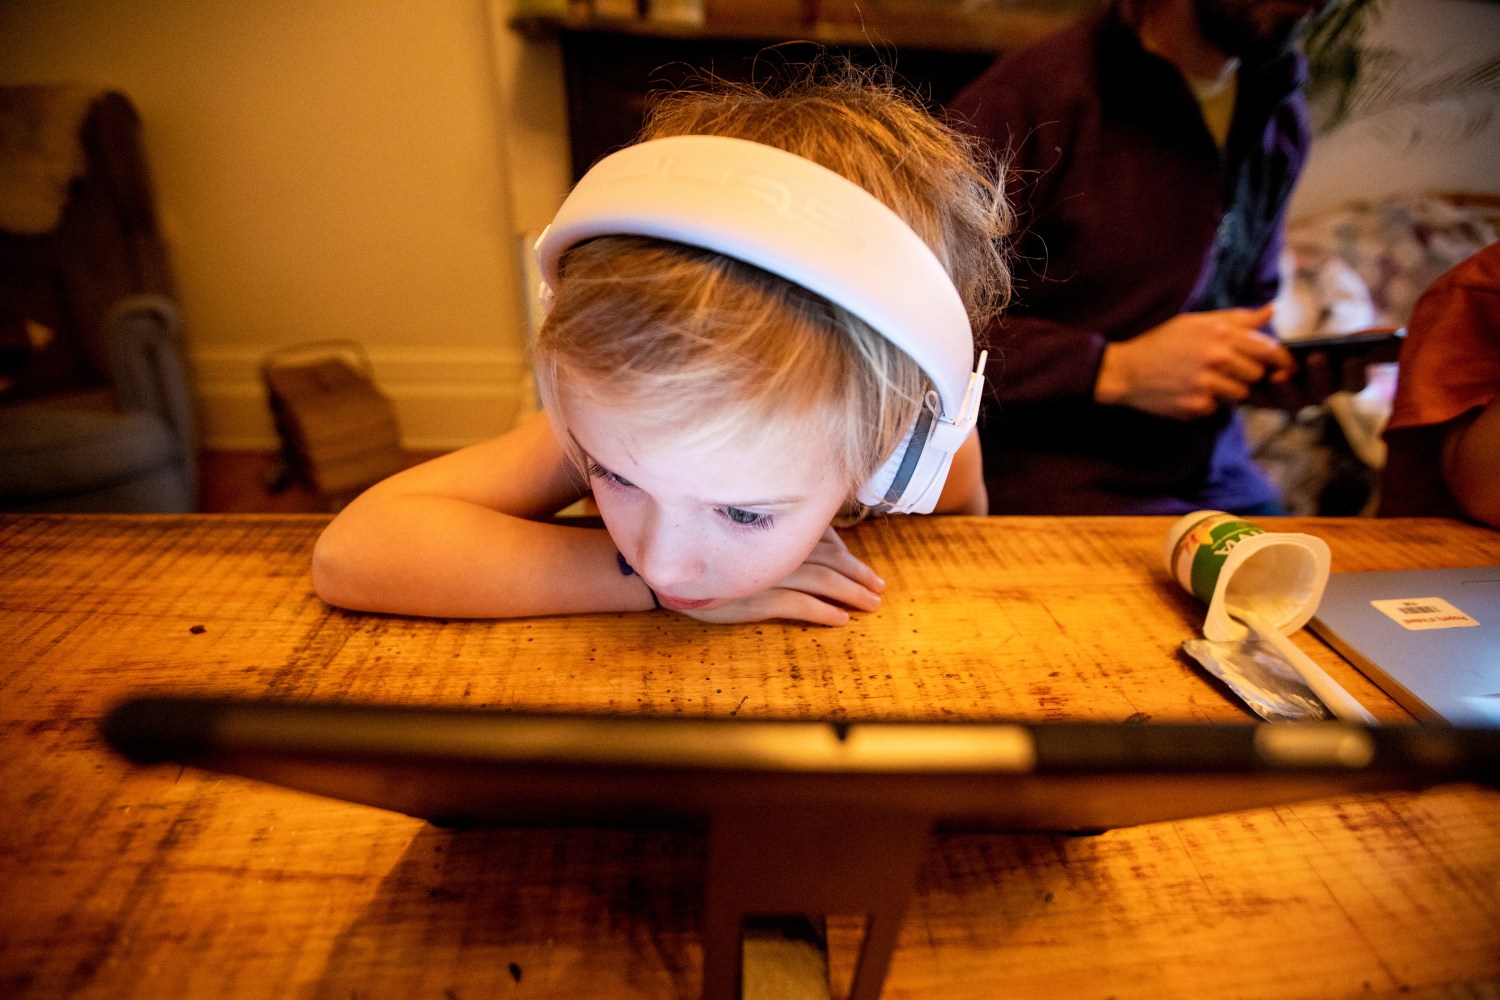 A child wearing headphones looking at a tablet computer.